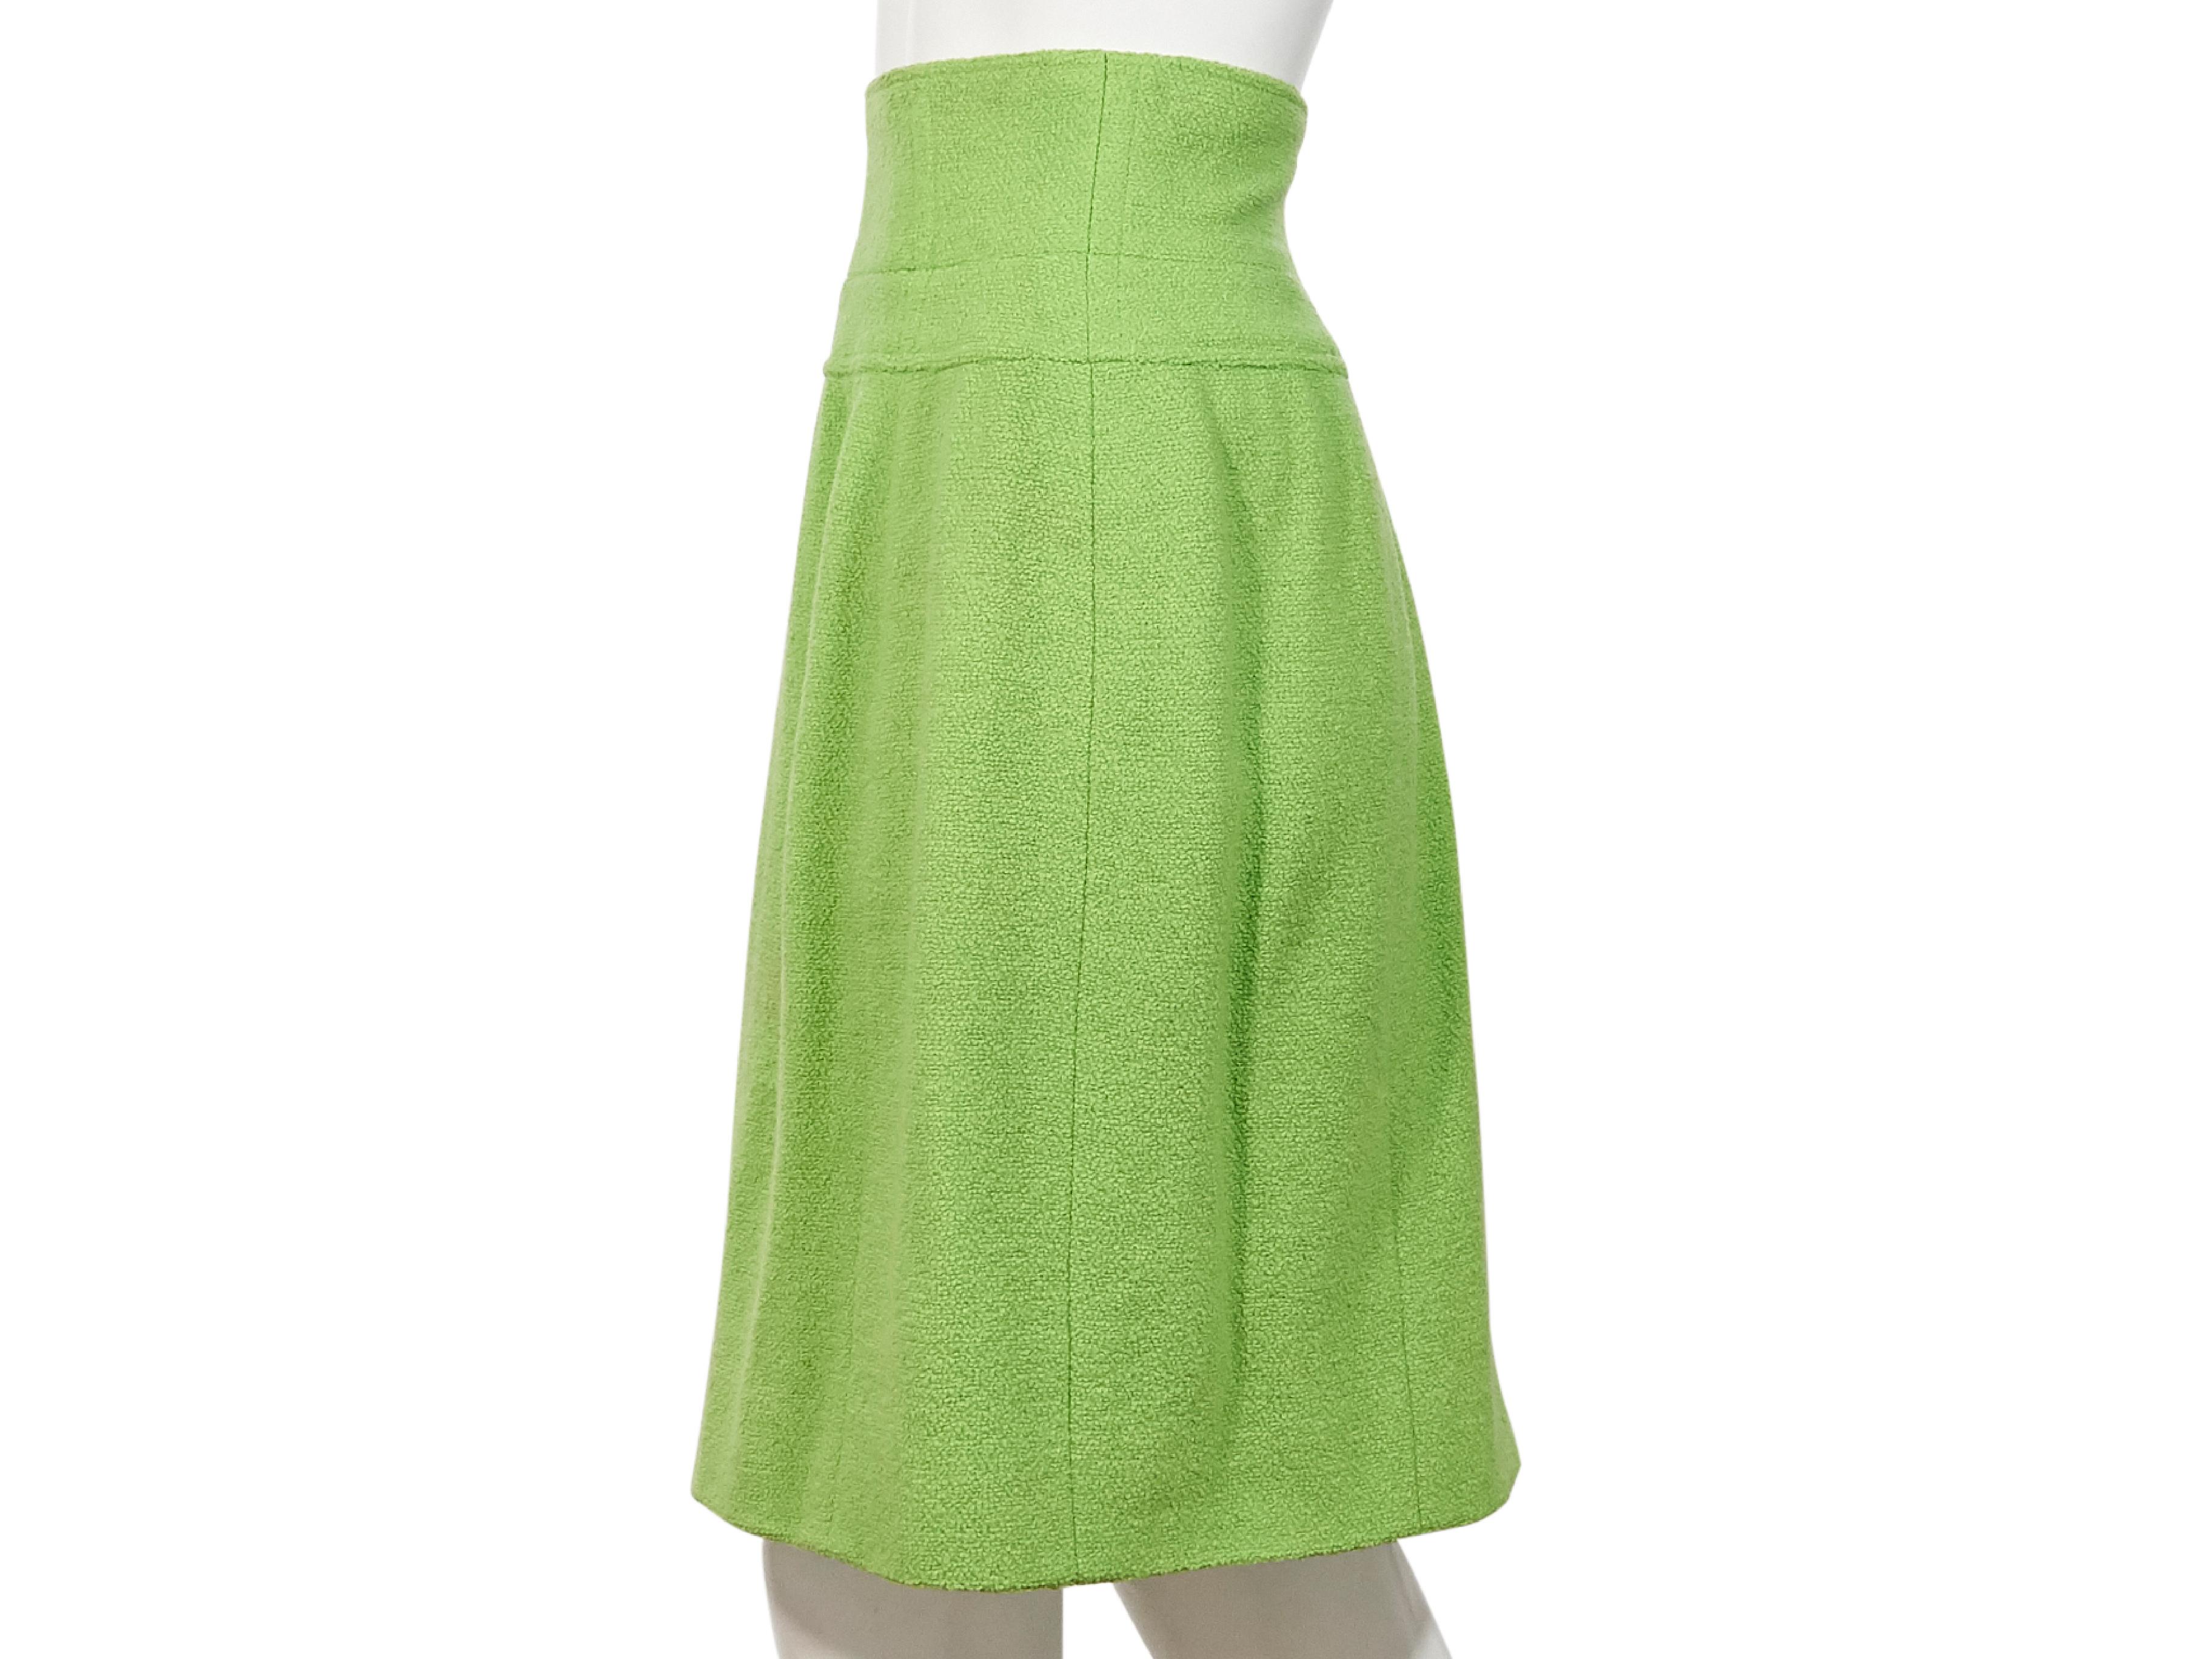 Product details:  Lime green wool skirt by Chanel.  From the FW 95 collection.  Wide banded waist.  Concealed back zip closure.  Label size FR 40.  29